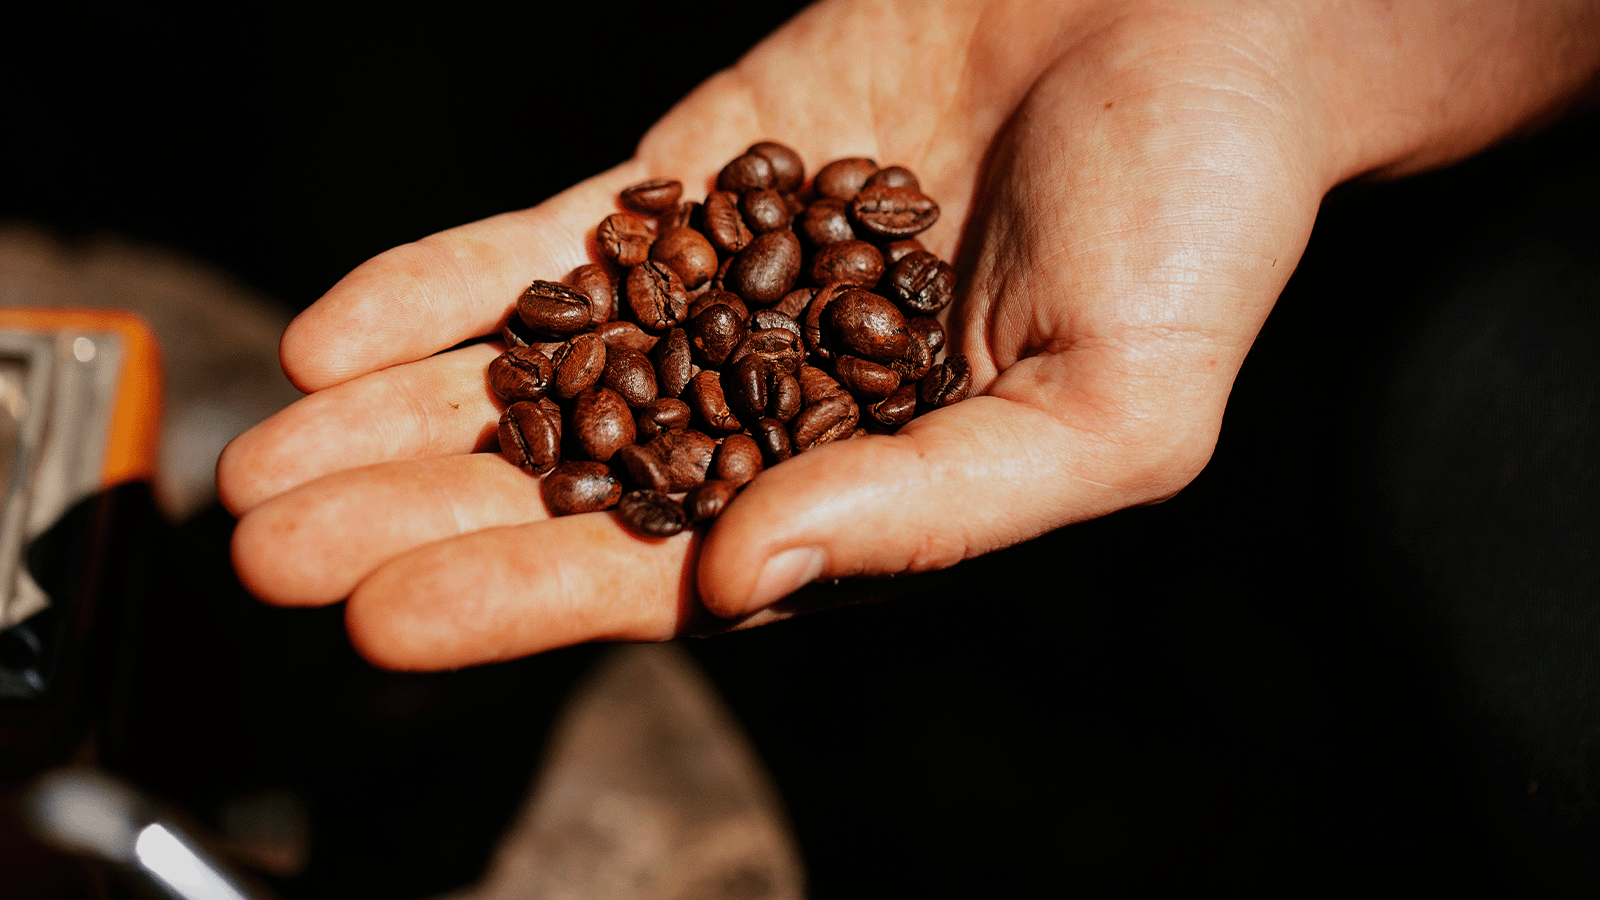 Useful Wholesale Arabica coffee Beans Business Tips